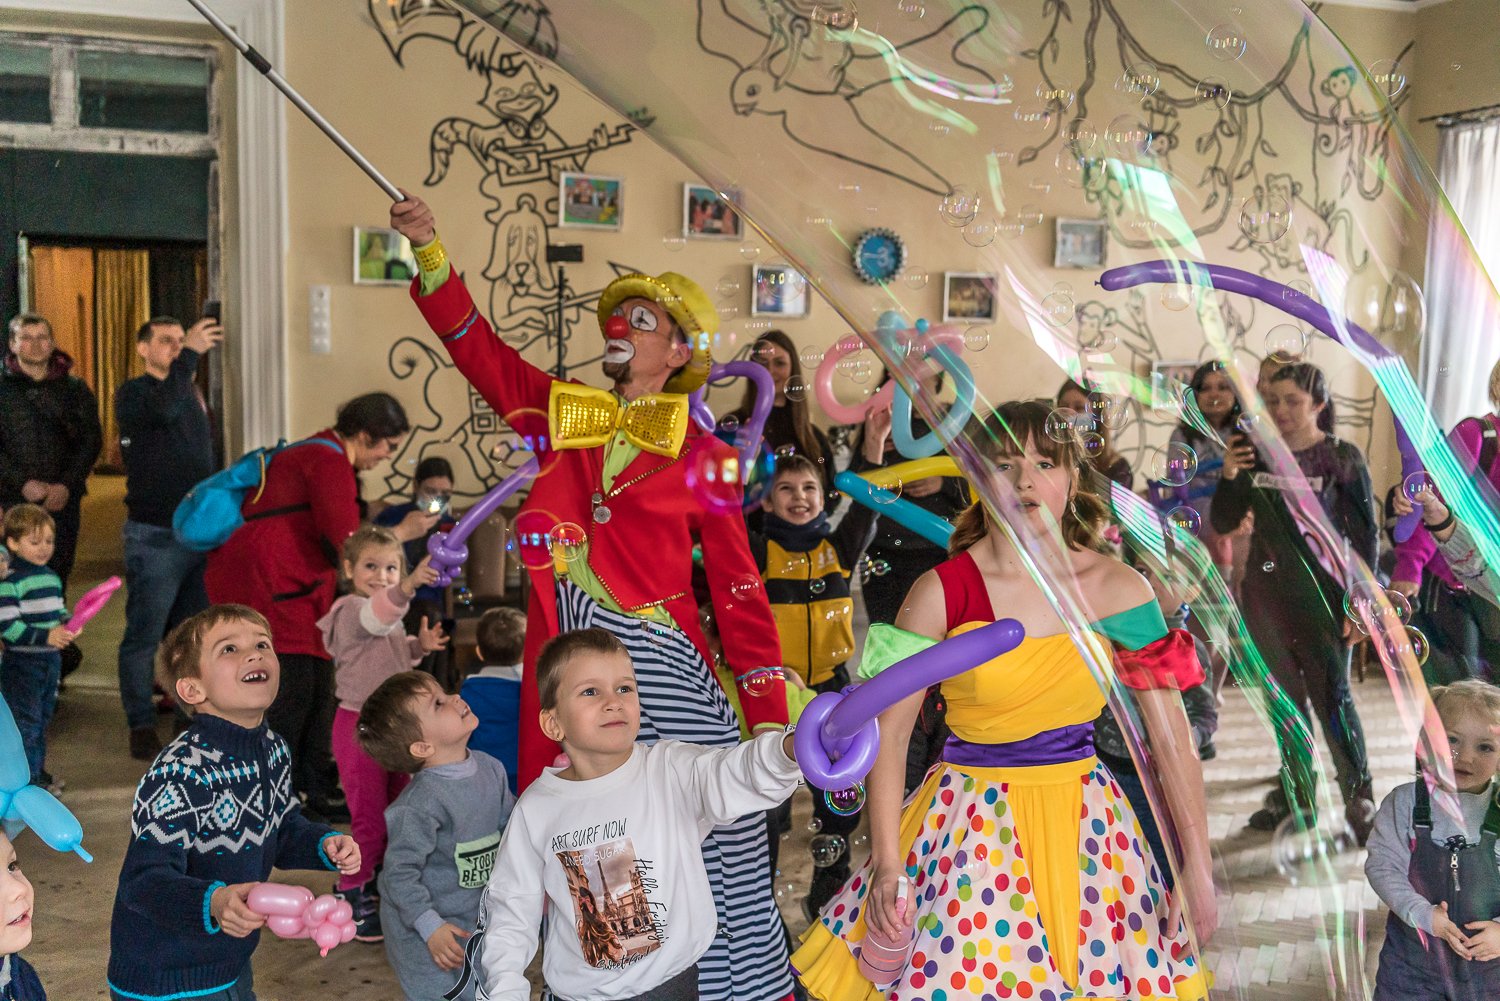  Yevheniy, who did not want to provide his last name, performing as Bantik the Clown, puts on a show for children at the Mariupol Puppet Theater on Sunday, January 30, 2022 in Mariupol, Ukraine. 